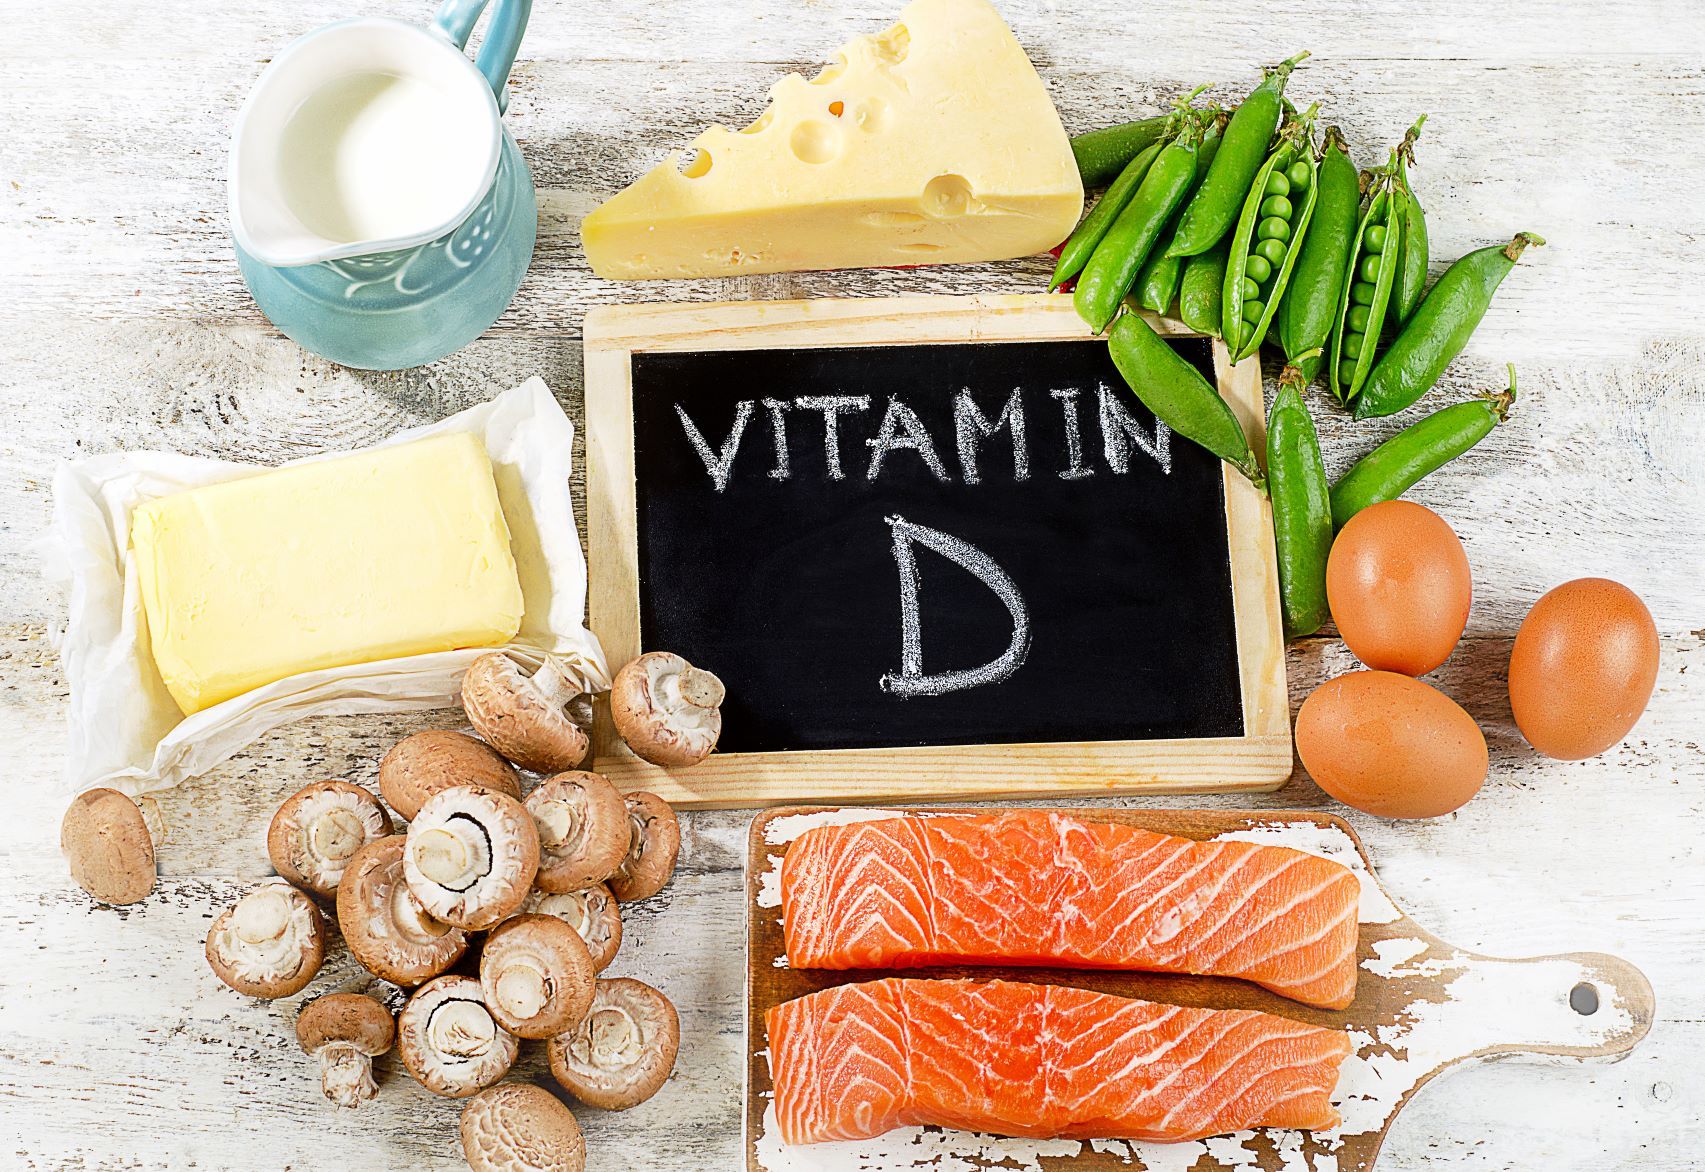 Watching your weight and vitamin D intake reduces cancer risk by a third